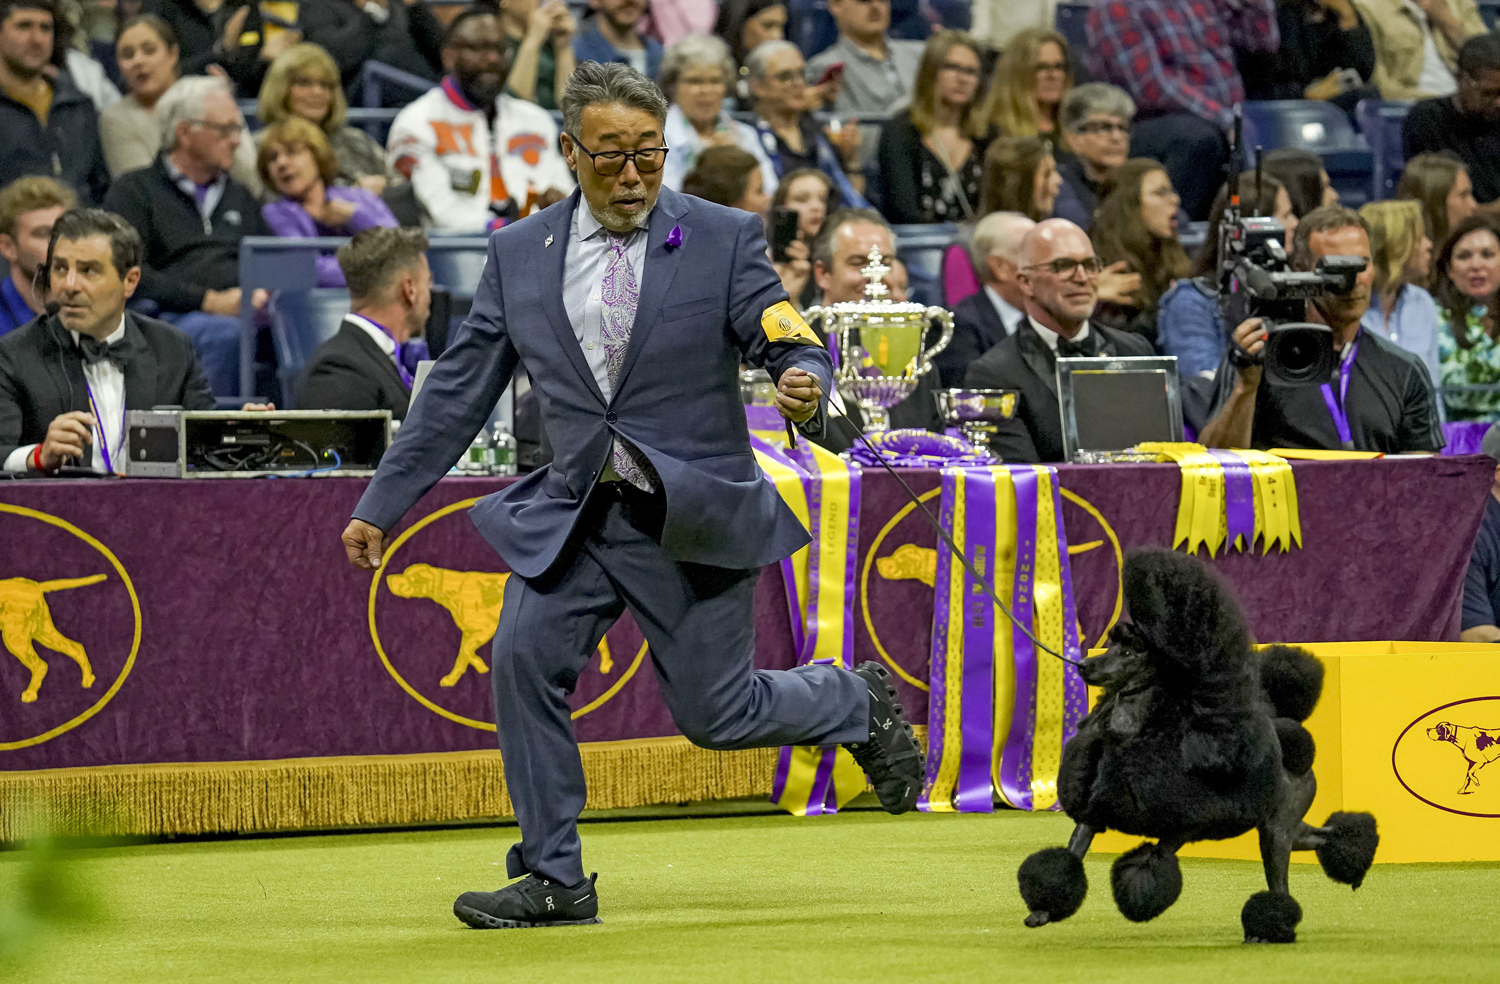 A groomed black poodle runs next to a man in a suit.